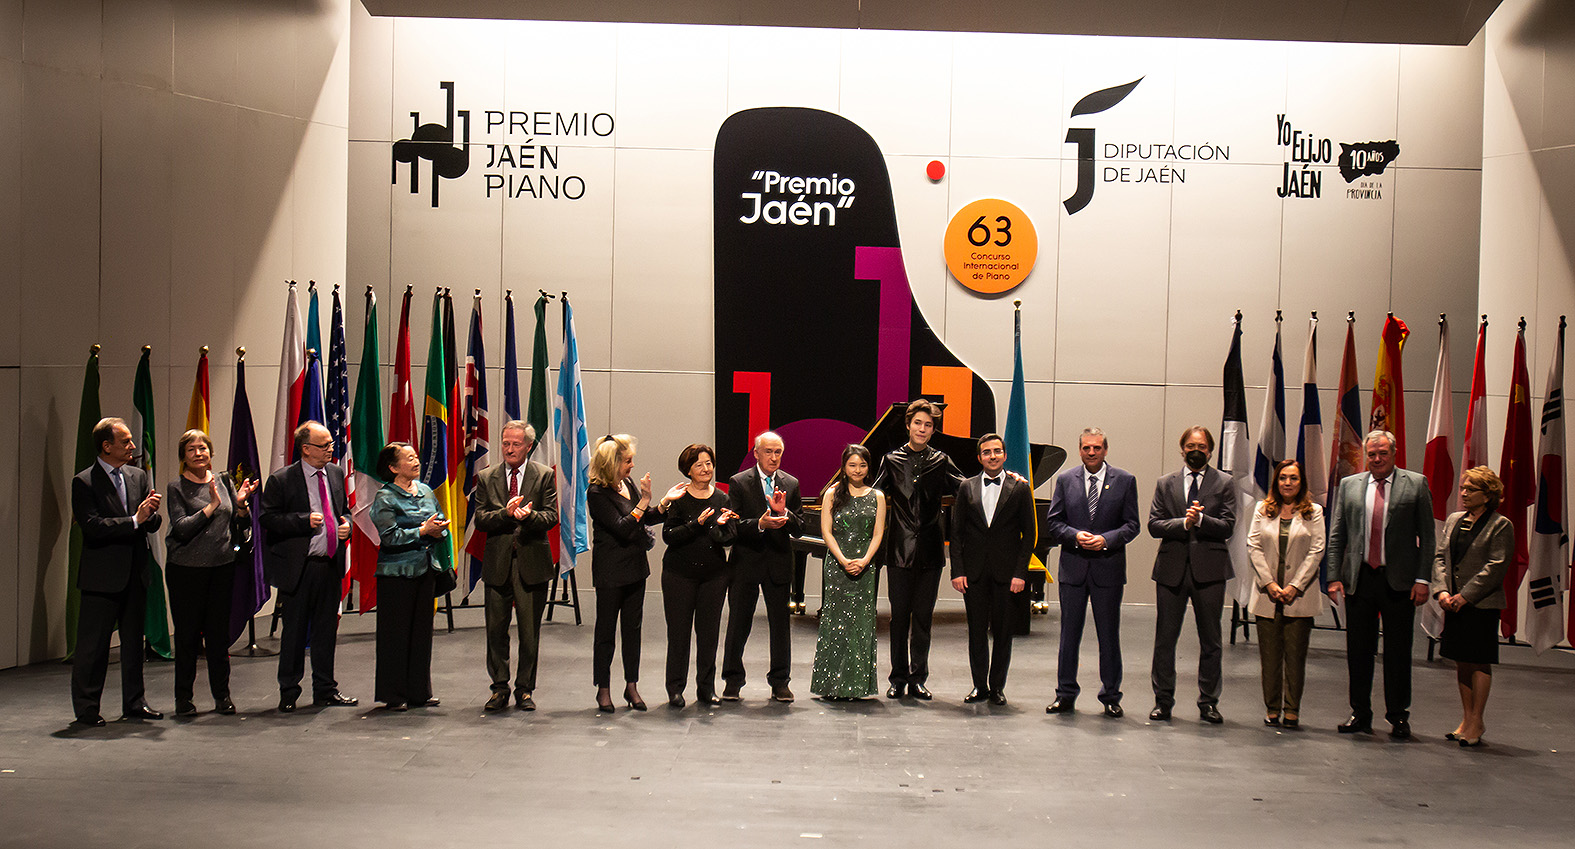 Foto de la noticia: The American pianist Ángel Wang is announced the final winner of the 63rd edition of the City Council’s “Jaén” Piano Prize.